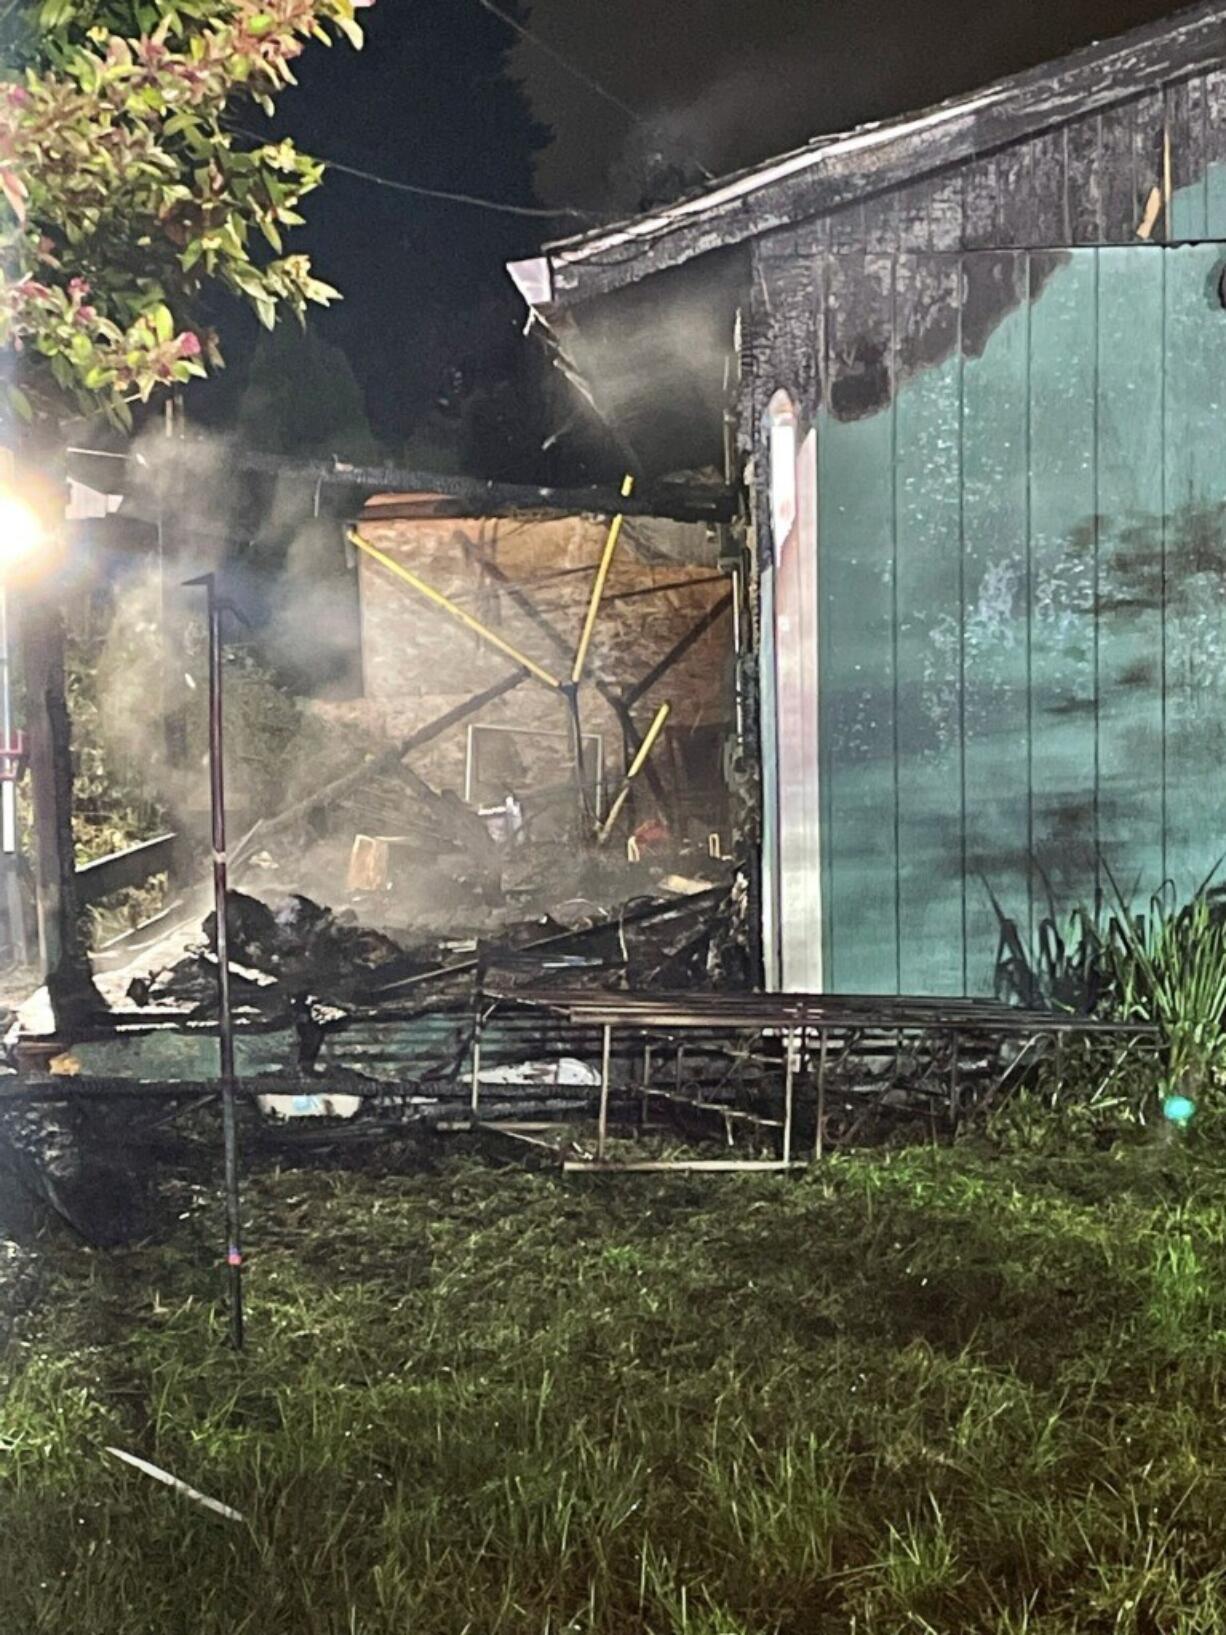 The Vancouver Fire Department responded to a house fire at 3508 X Street on Vancouver's Rose Village neighborhood on Friday night.